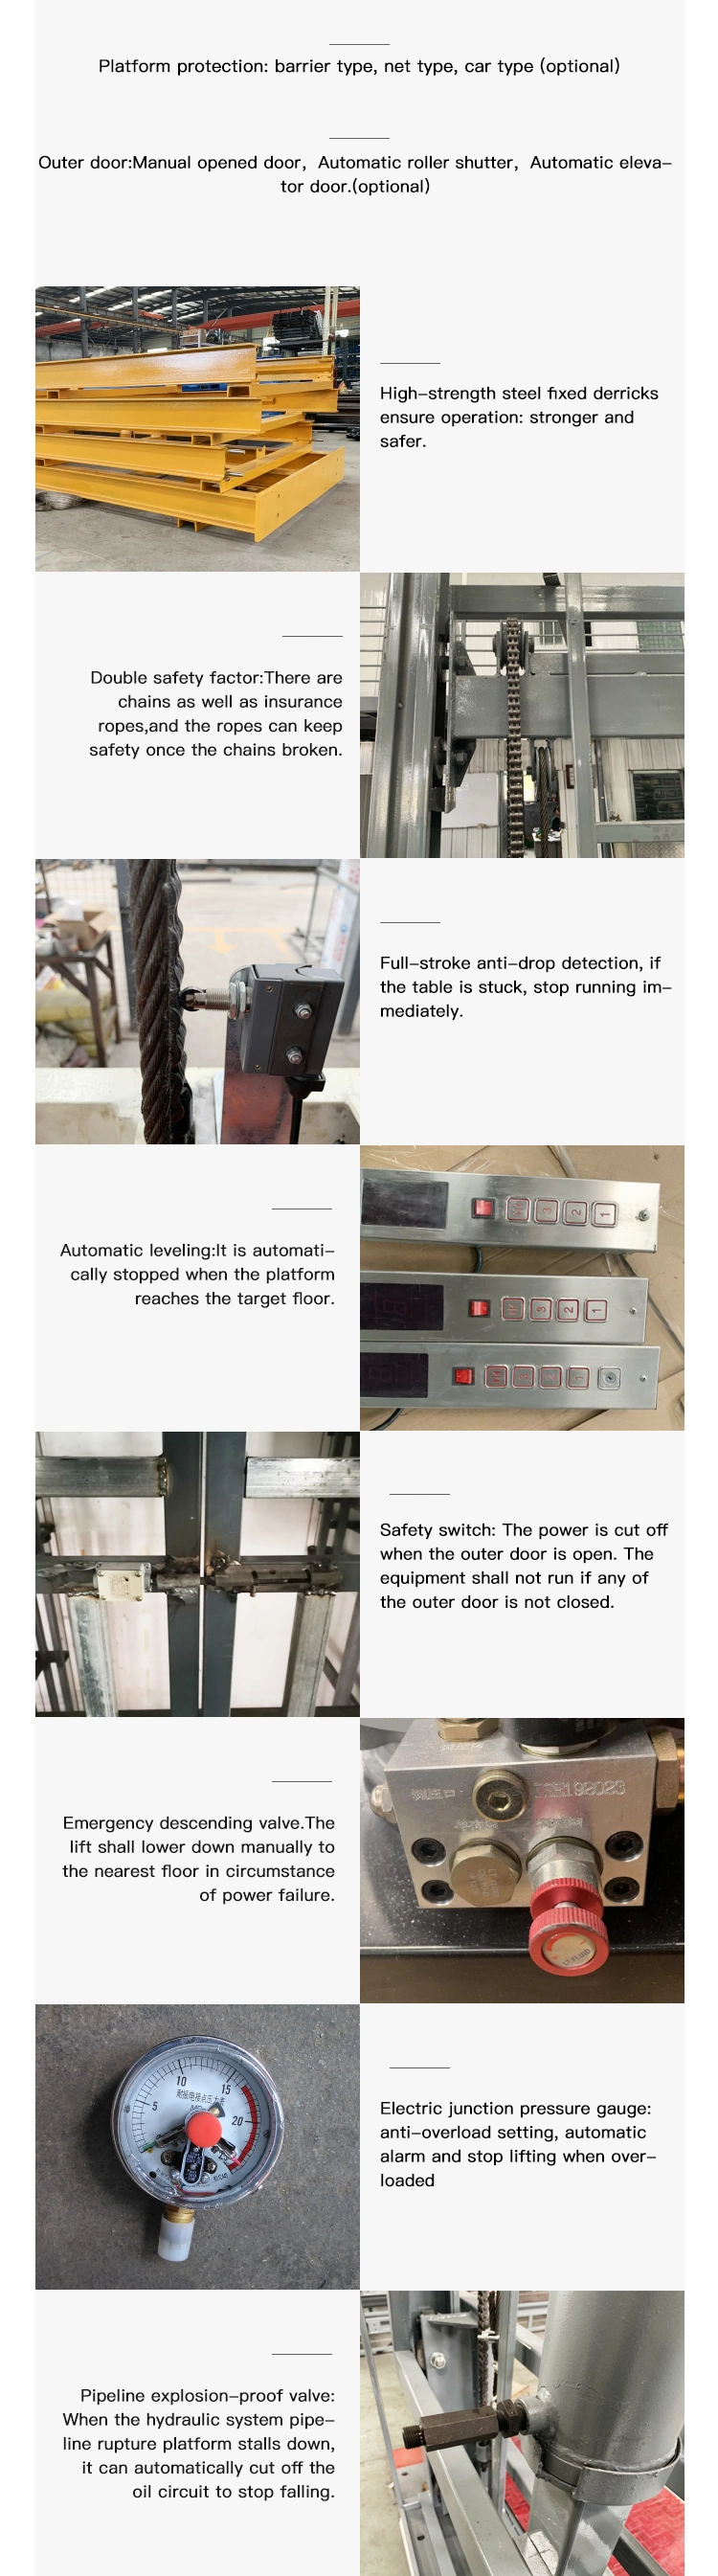 Cargo Lift, Hydraulic Vertical Warehouse Material Lift Equipment, Wall Mounted Electric Rail Guide Freight Platform Elevator